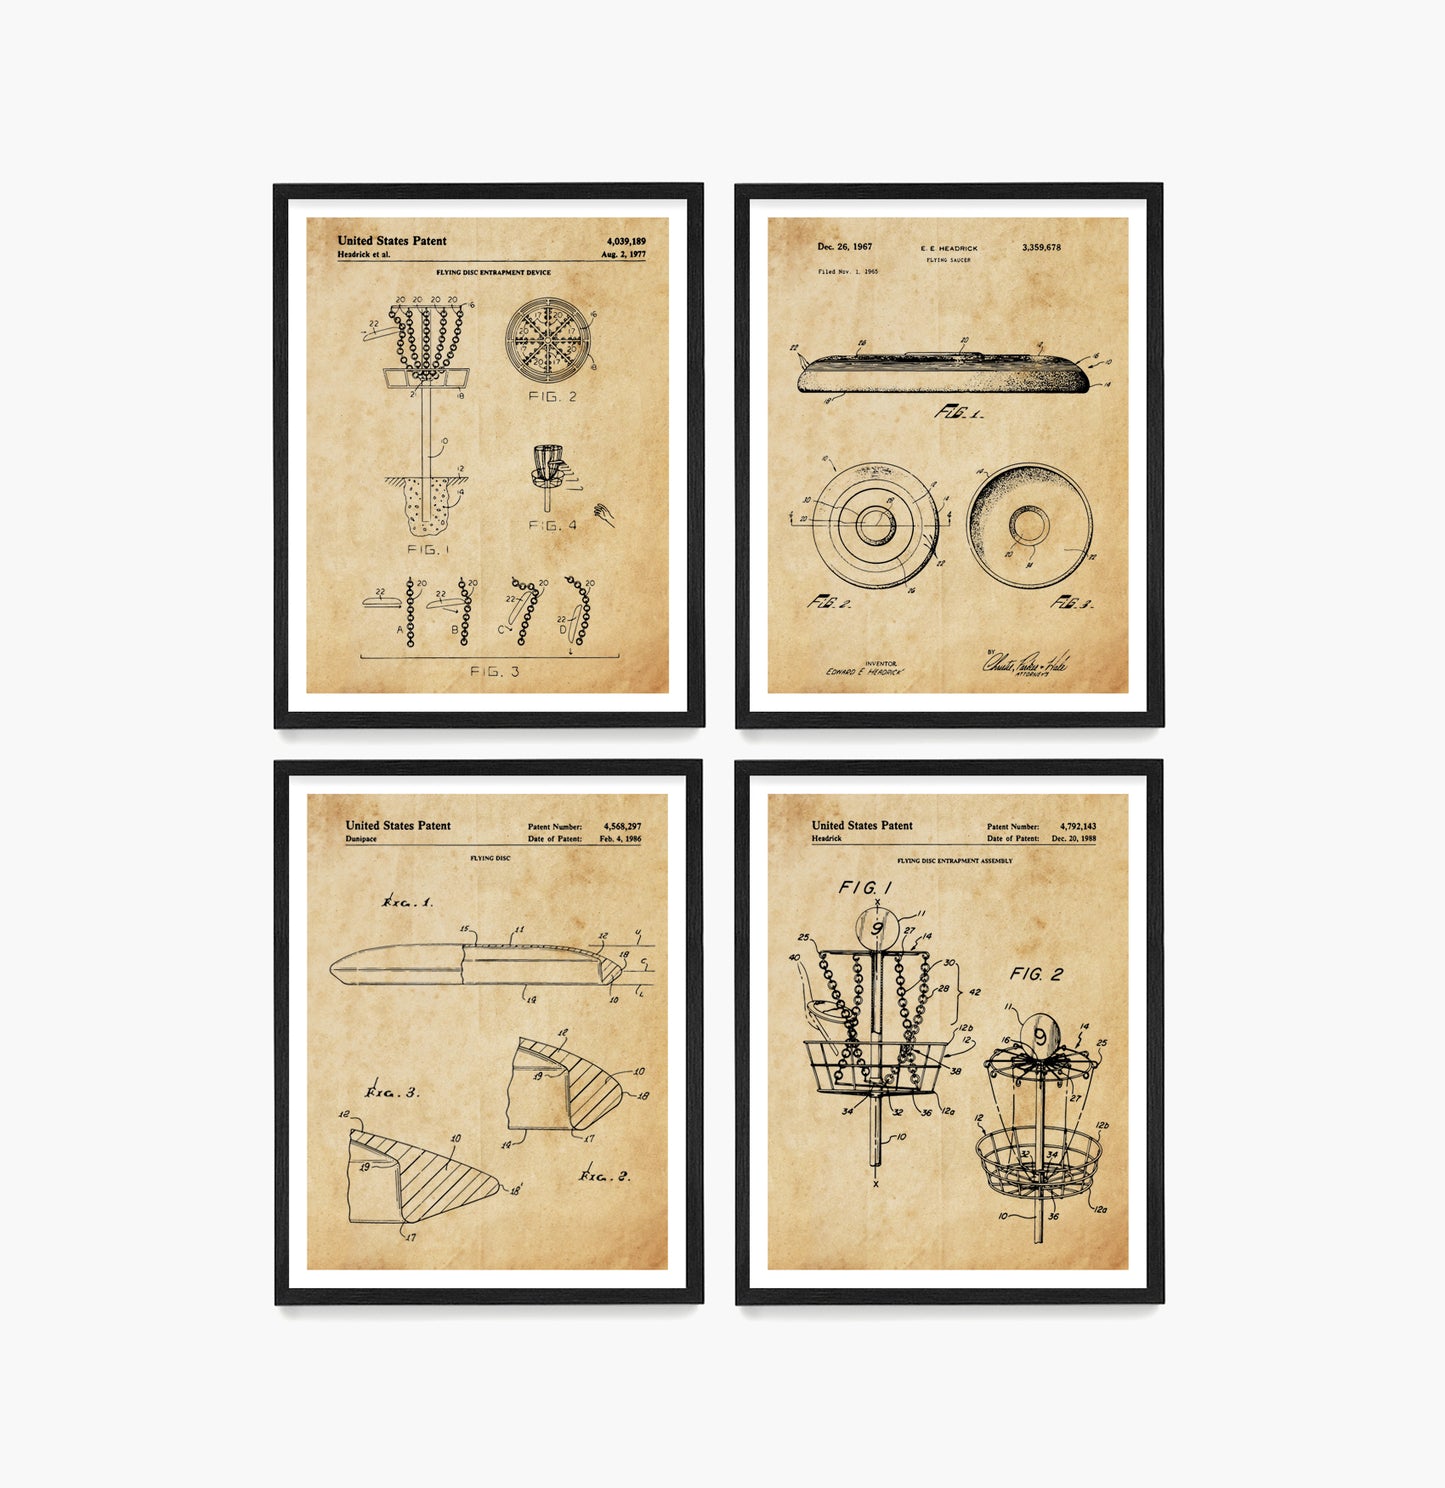 Frisbee Patent Wall Art, Disc Golf Patent Poster